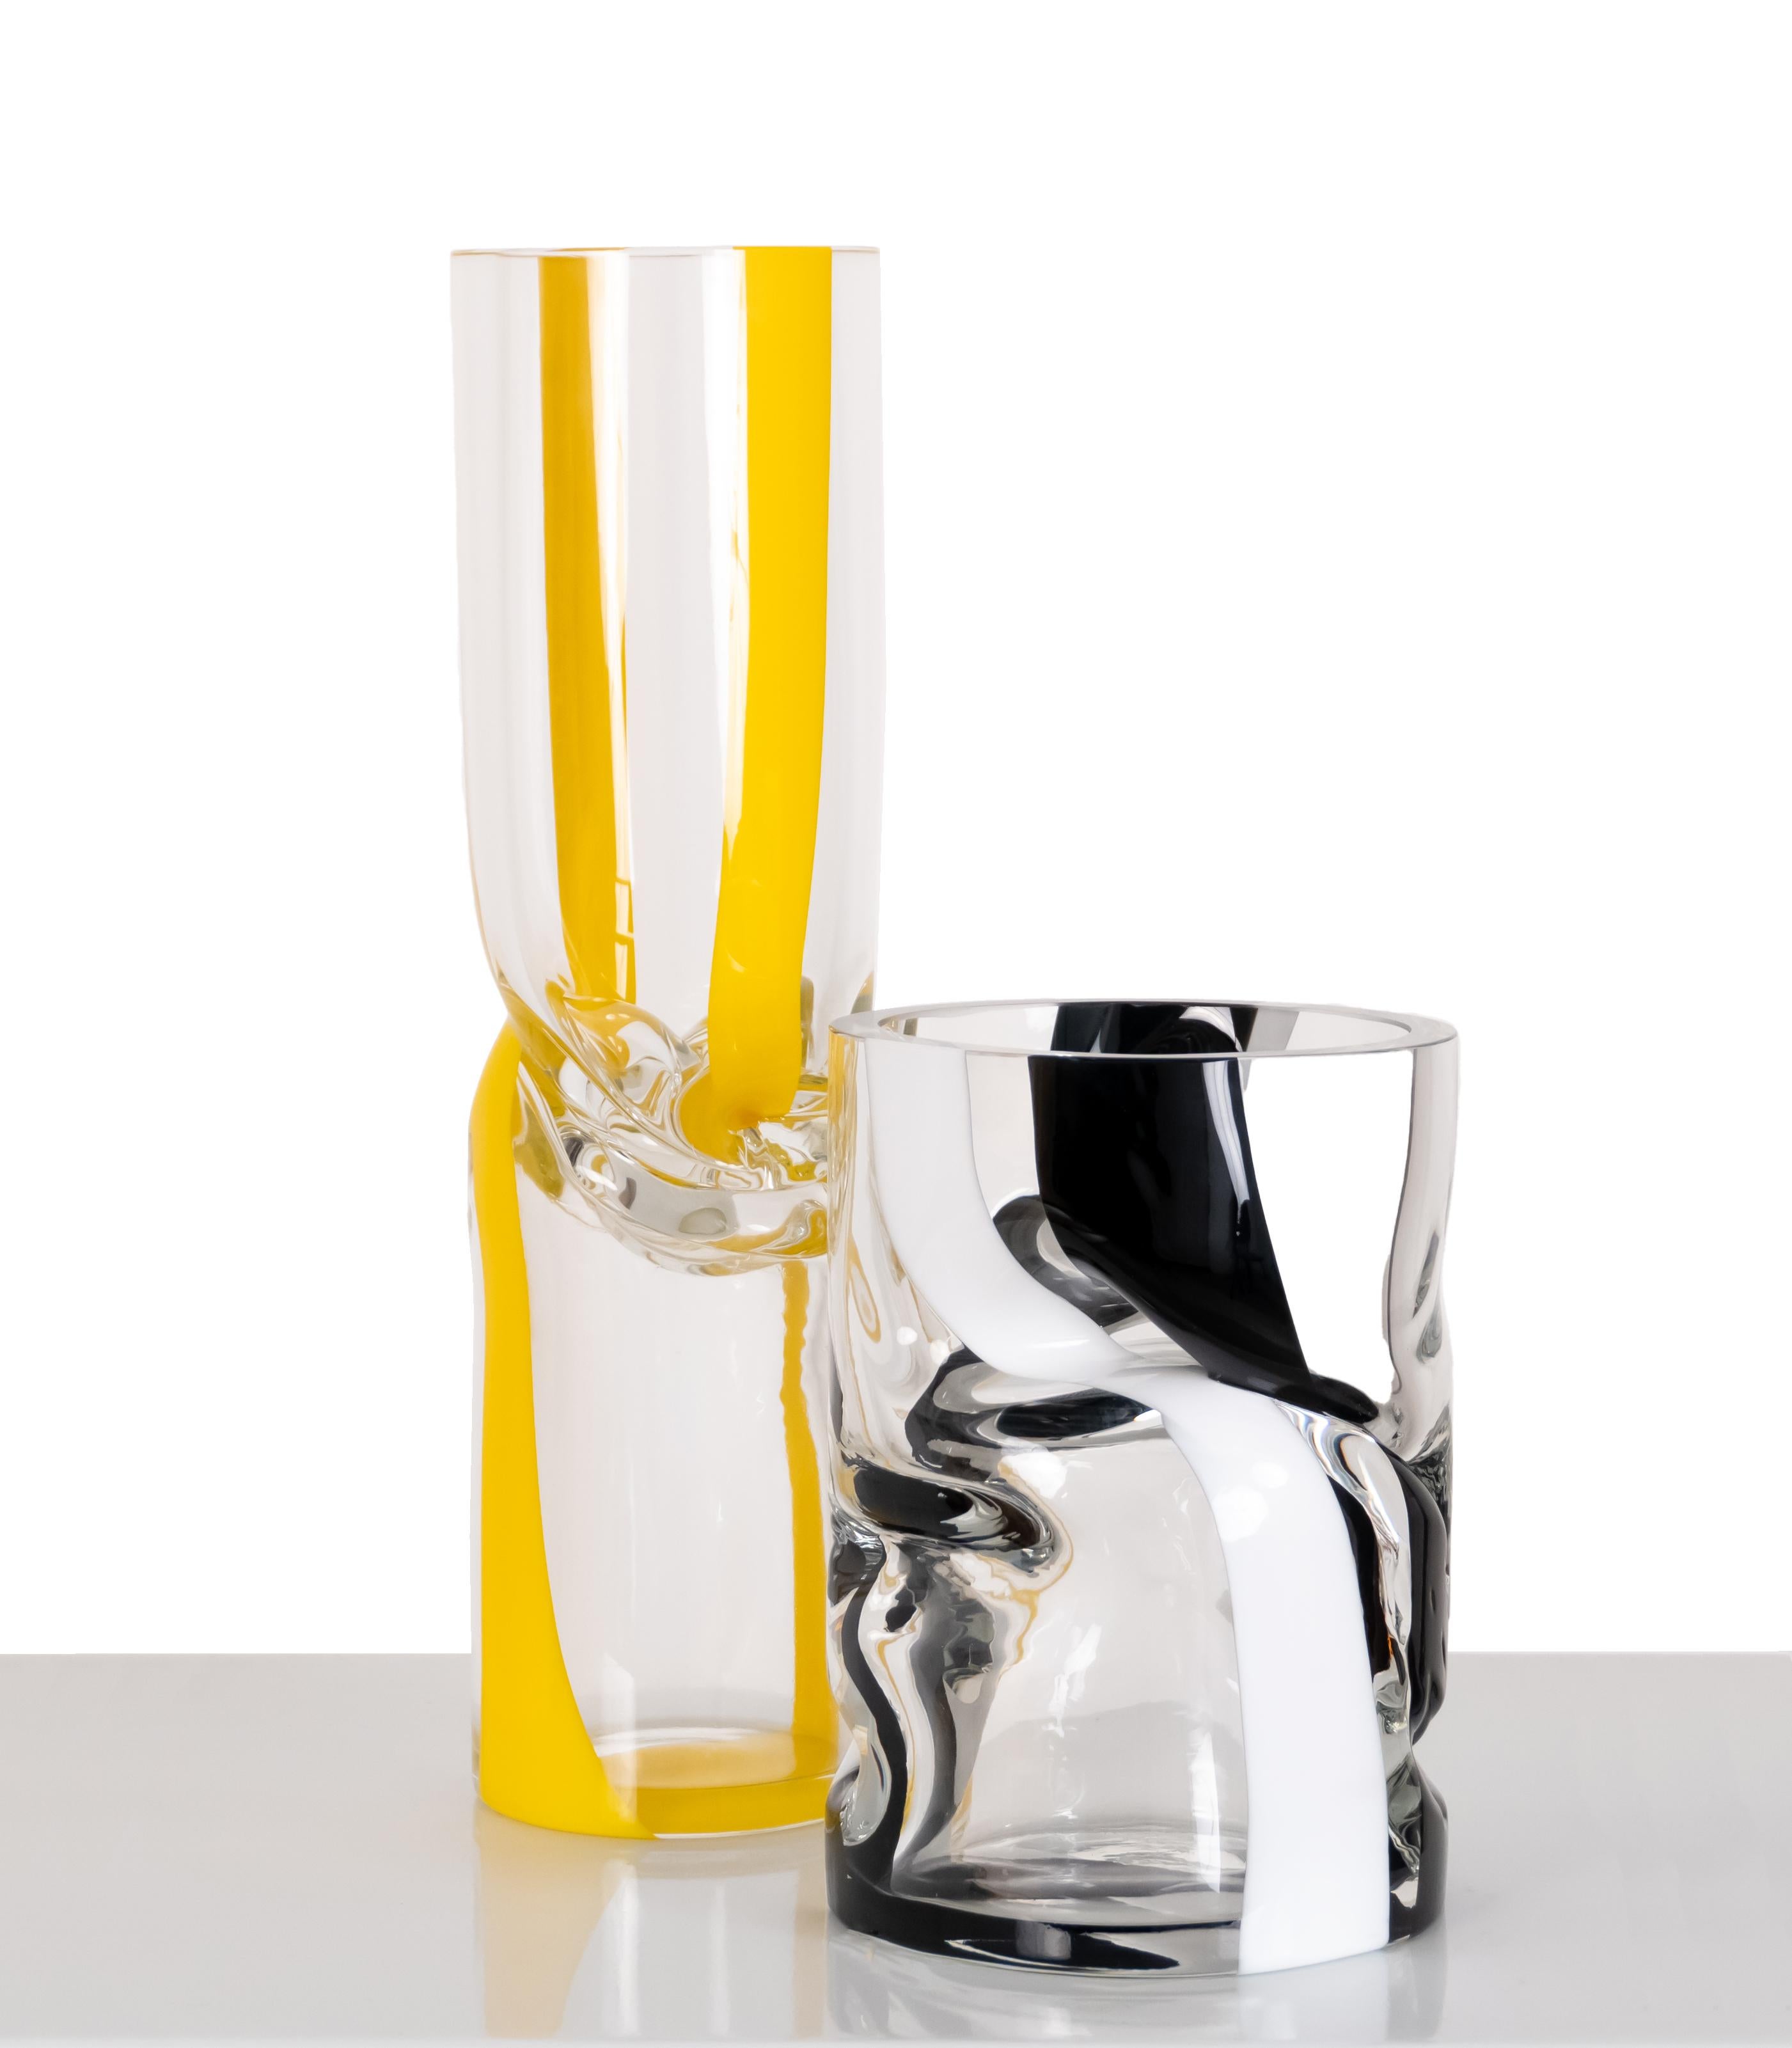 American Small Black & White Crushed Hand Blown Glass Vase by Avram Rusu Studio For Sale